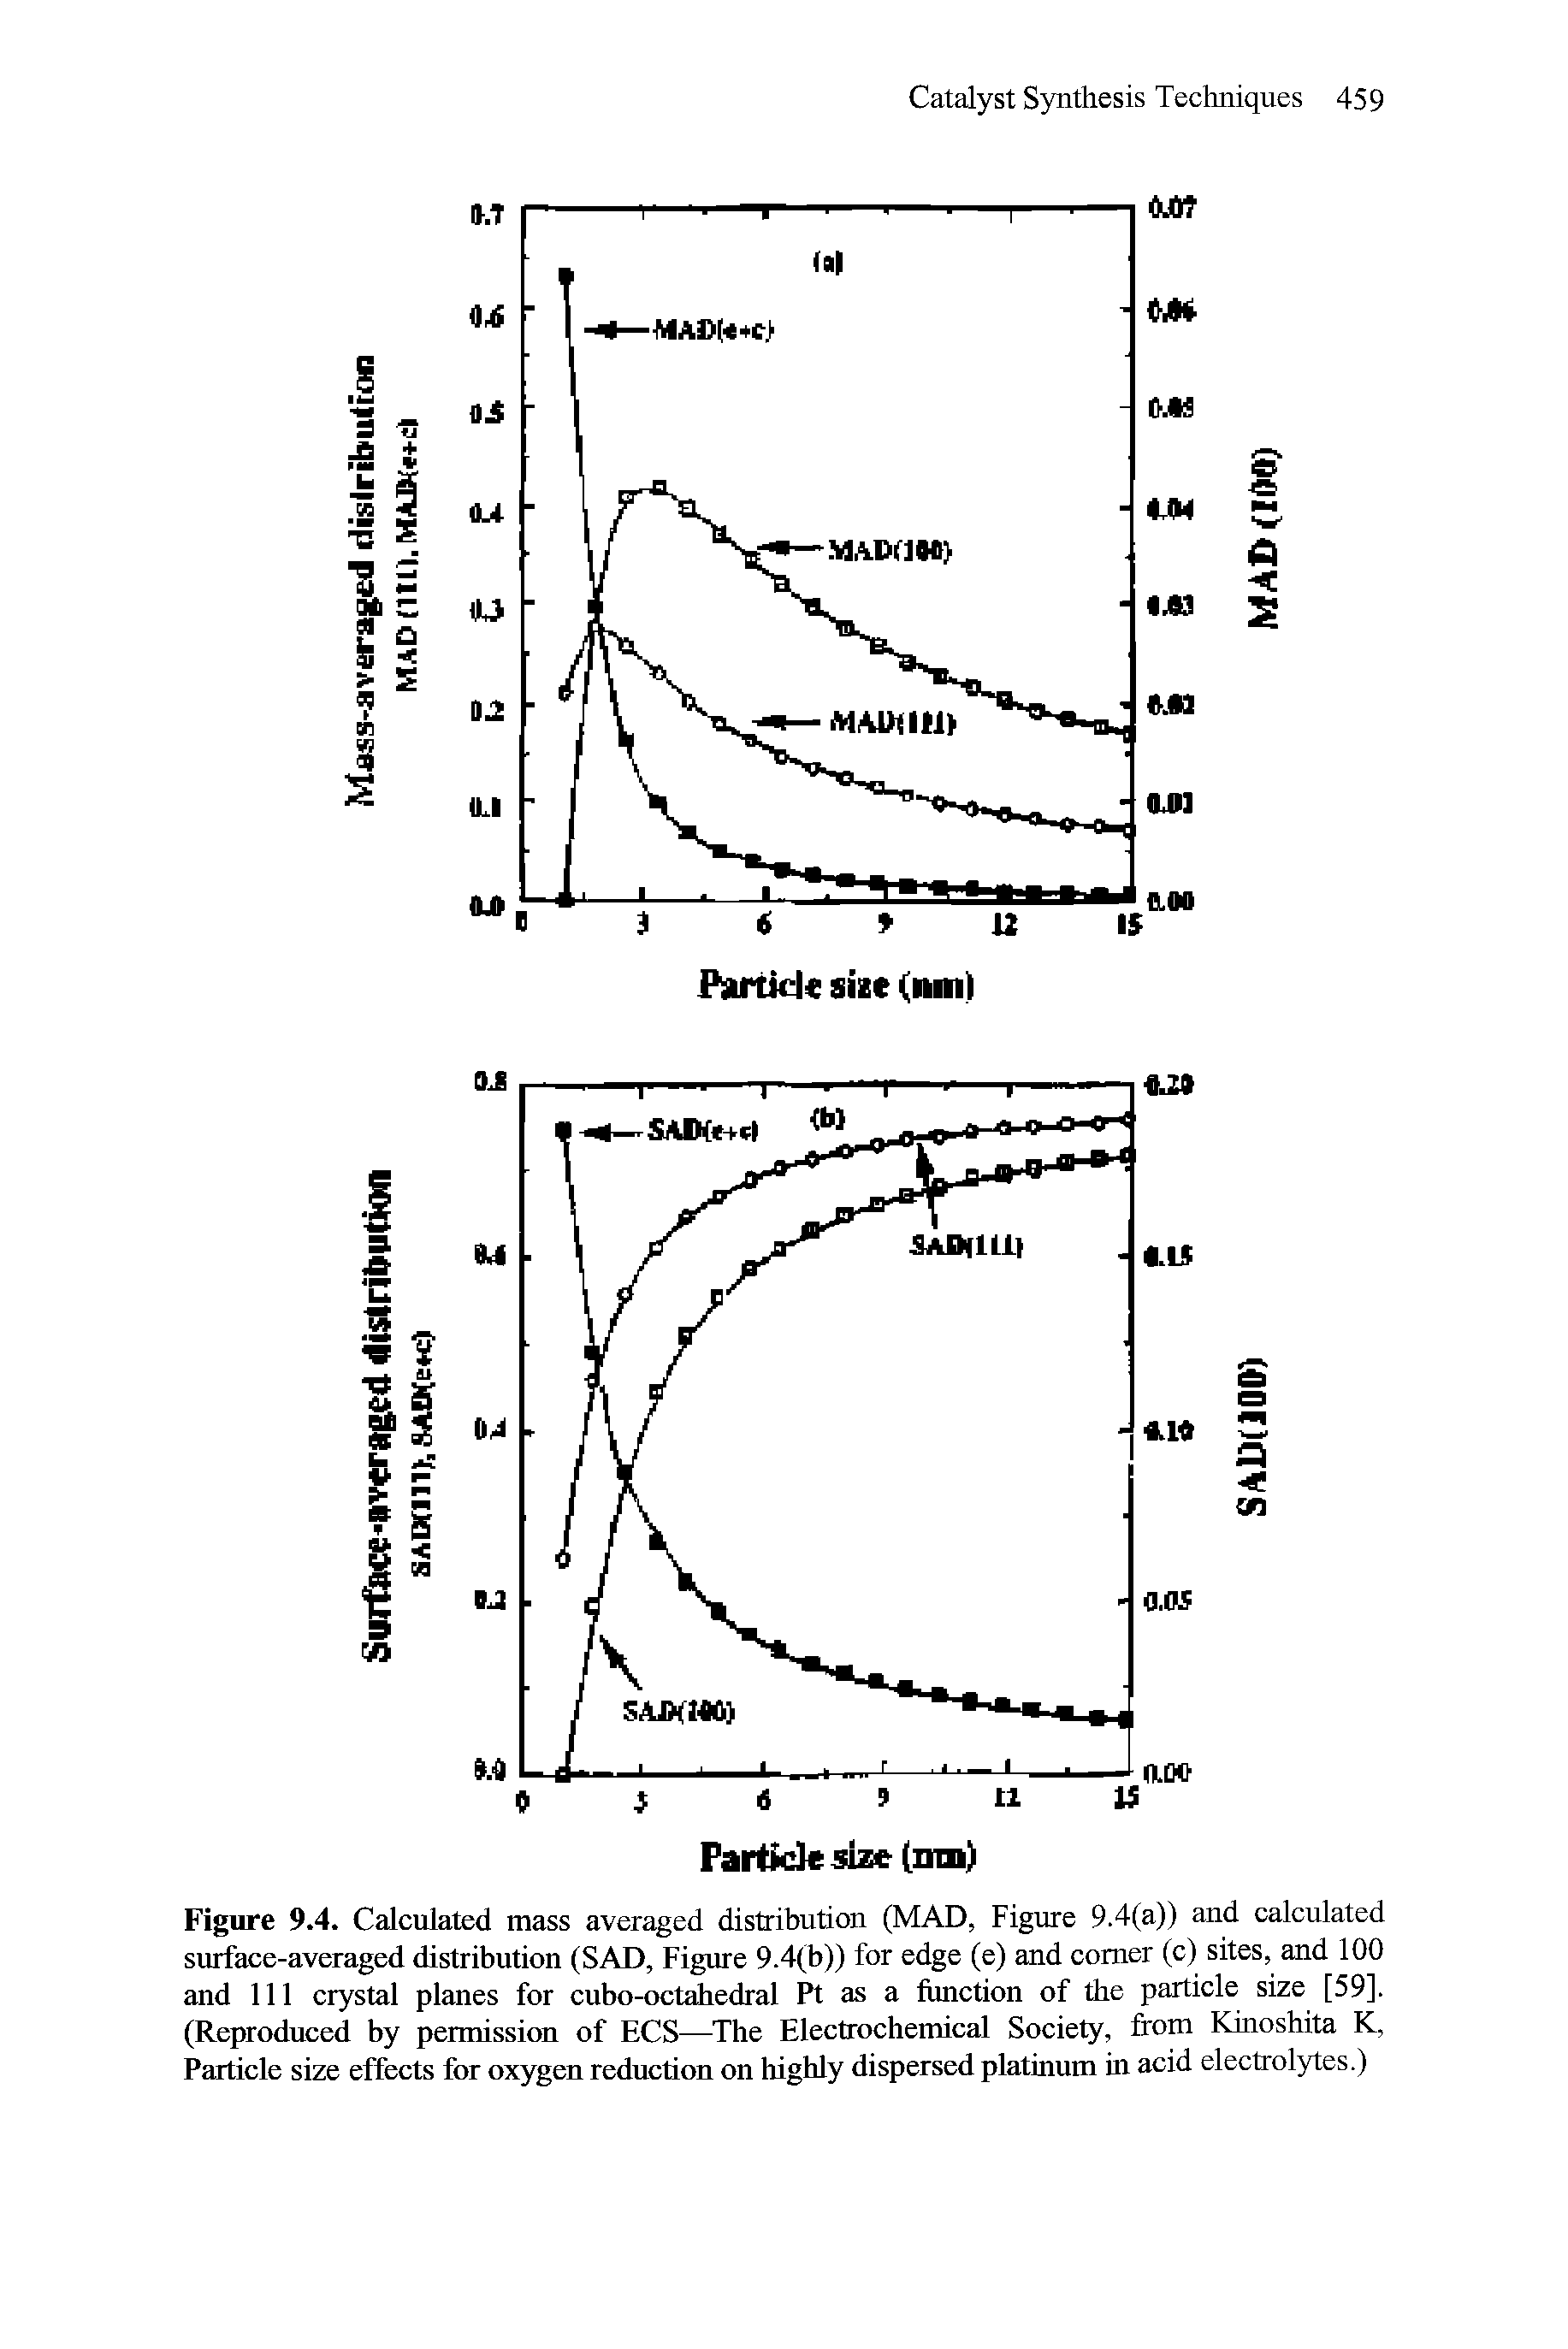 Figure 9.4. Calculated mass averaged distribution (MAD, Figure 9.4(a)) and calculated surface-averaged distribution (SAD, Figure 9.4(b)) for edge (e) and comer (c) sites, and 100 and 111 crystal planes for cubo-octahedral Pt as a function of the particle size [59]. (Reproduced by permission of ECS—The Electrochemical Society, from Kinoshita K, Particle size effects for oxygen reduction on highly dispersed platinum m acid electrolytes.)...